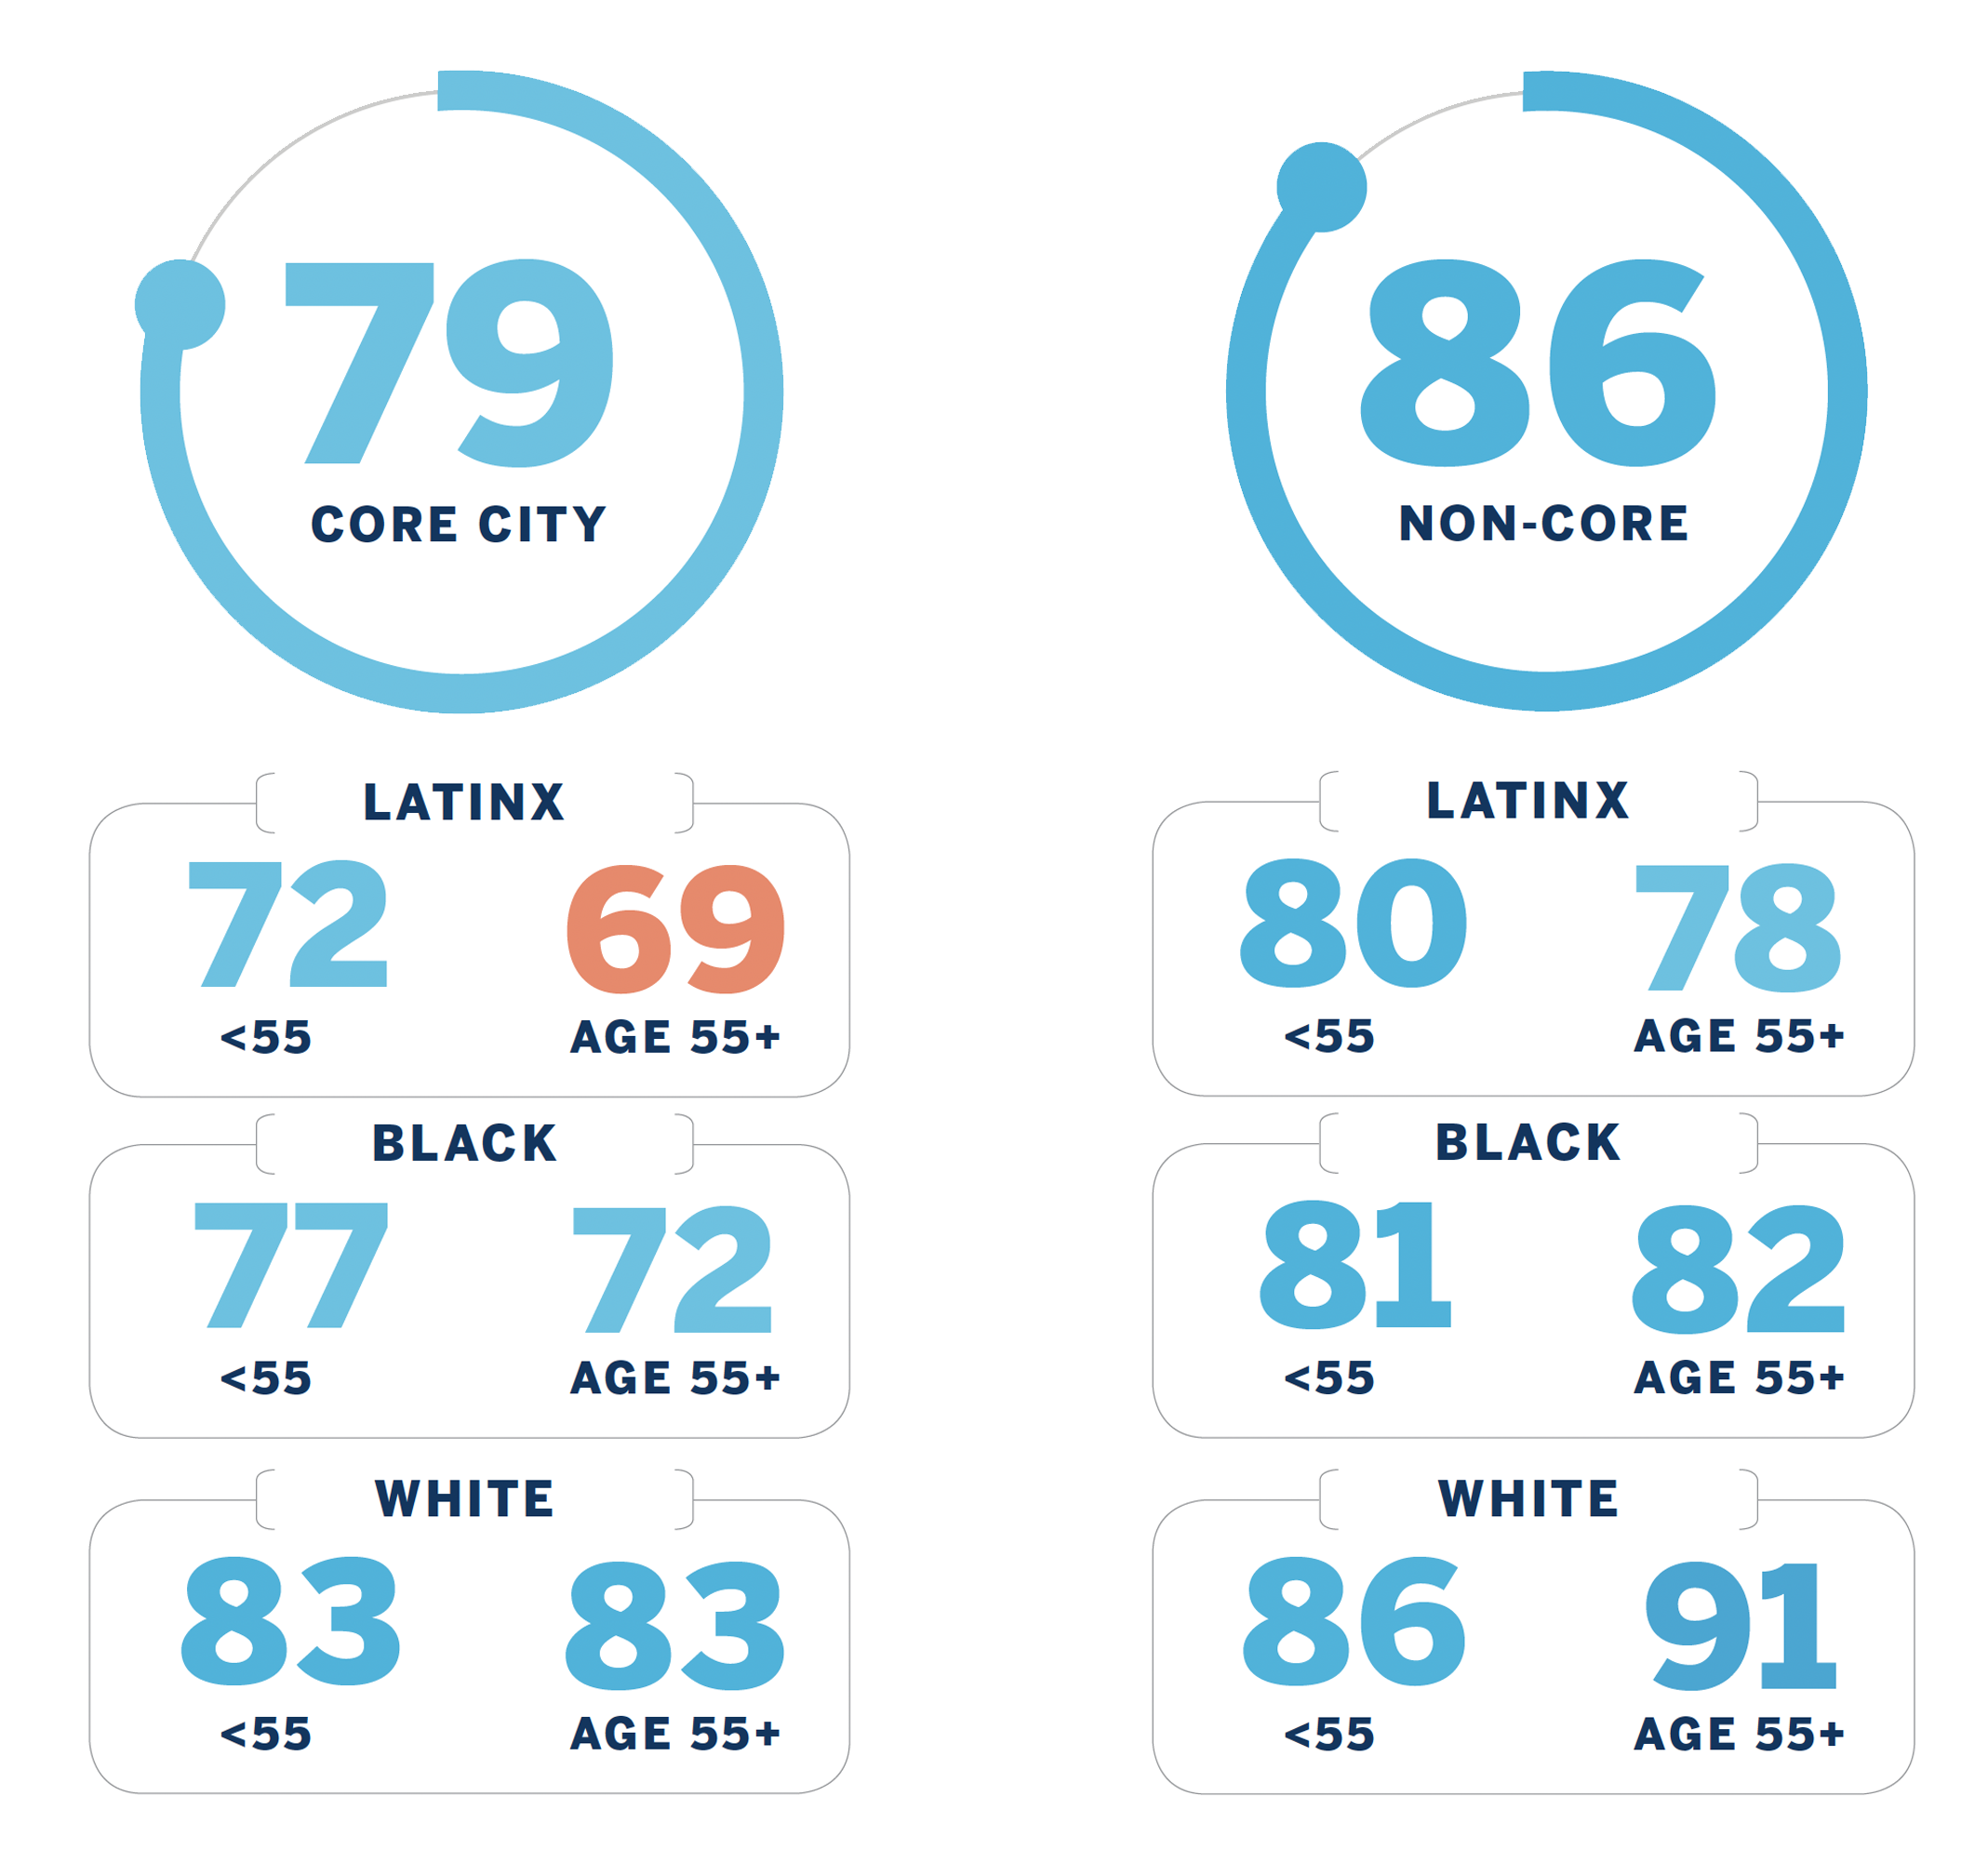 Chart breakdown: Core City: 79 (broken down by Latinx, Black, and White ages less than and over 55) Non-Core: 86 (broken down by Latinx, Black, and White ages less than and over 55)